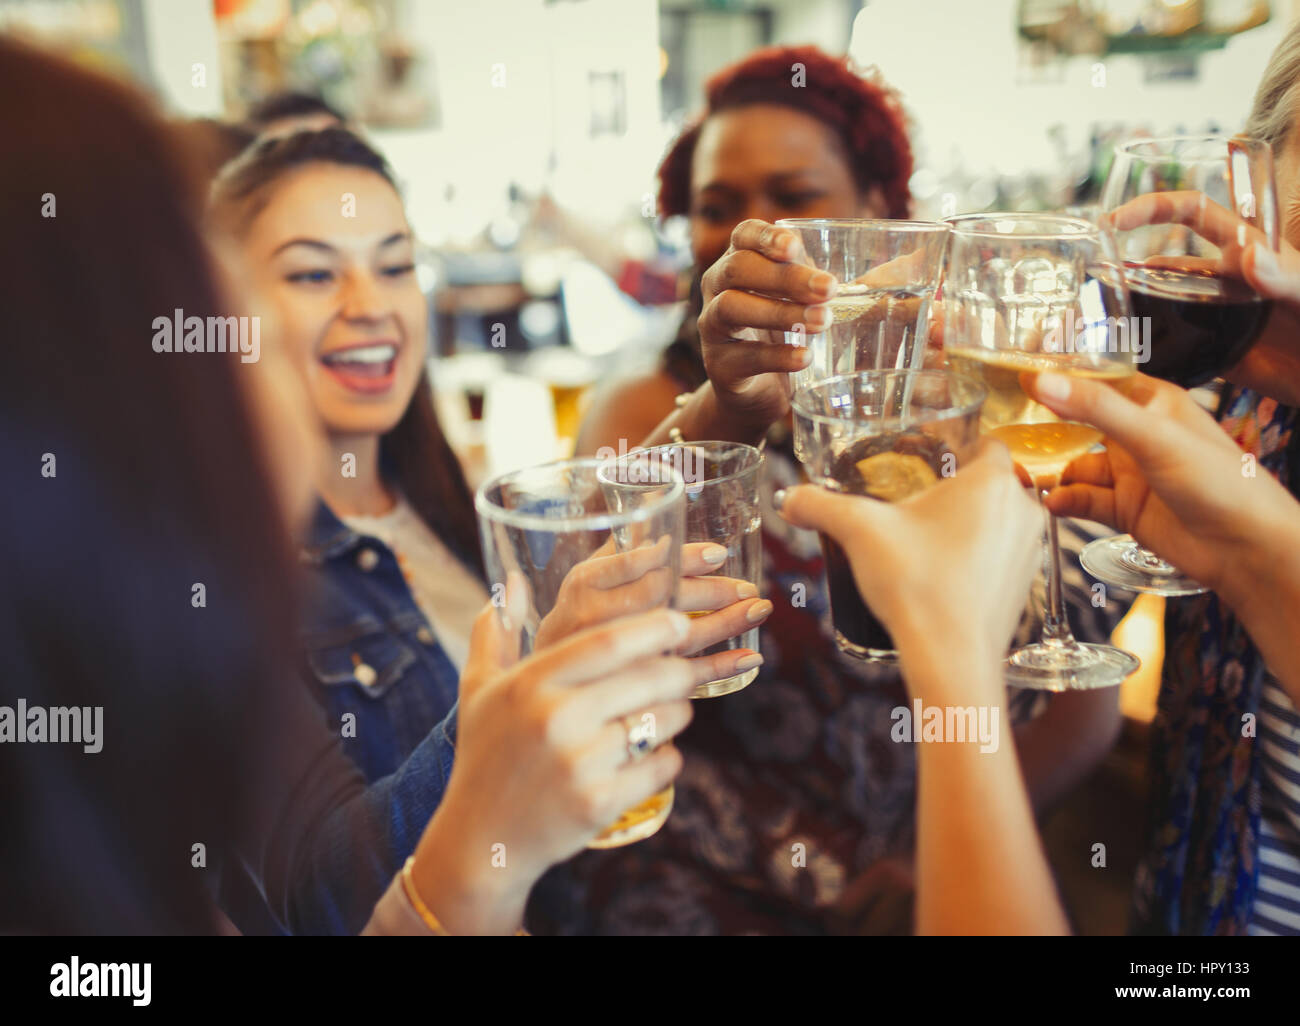 Enthusiastic women celebrating, toasting beer and wine glasses at bar Stock Photo